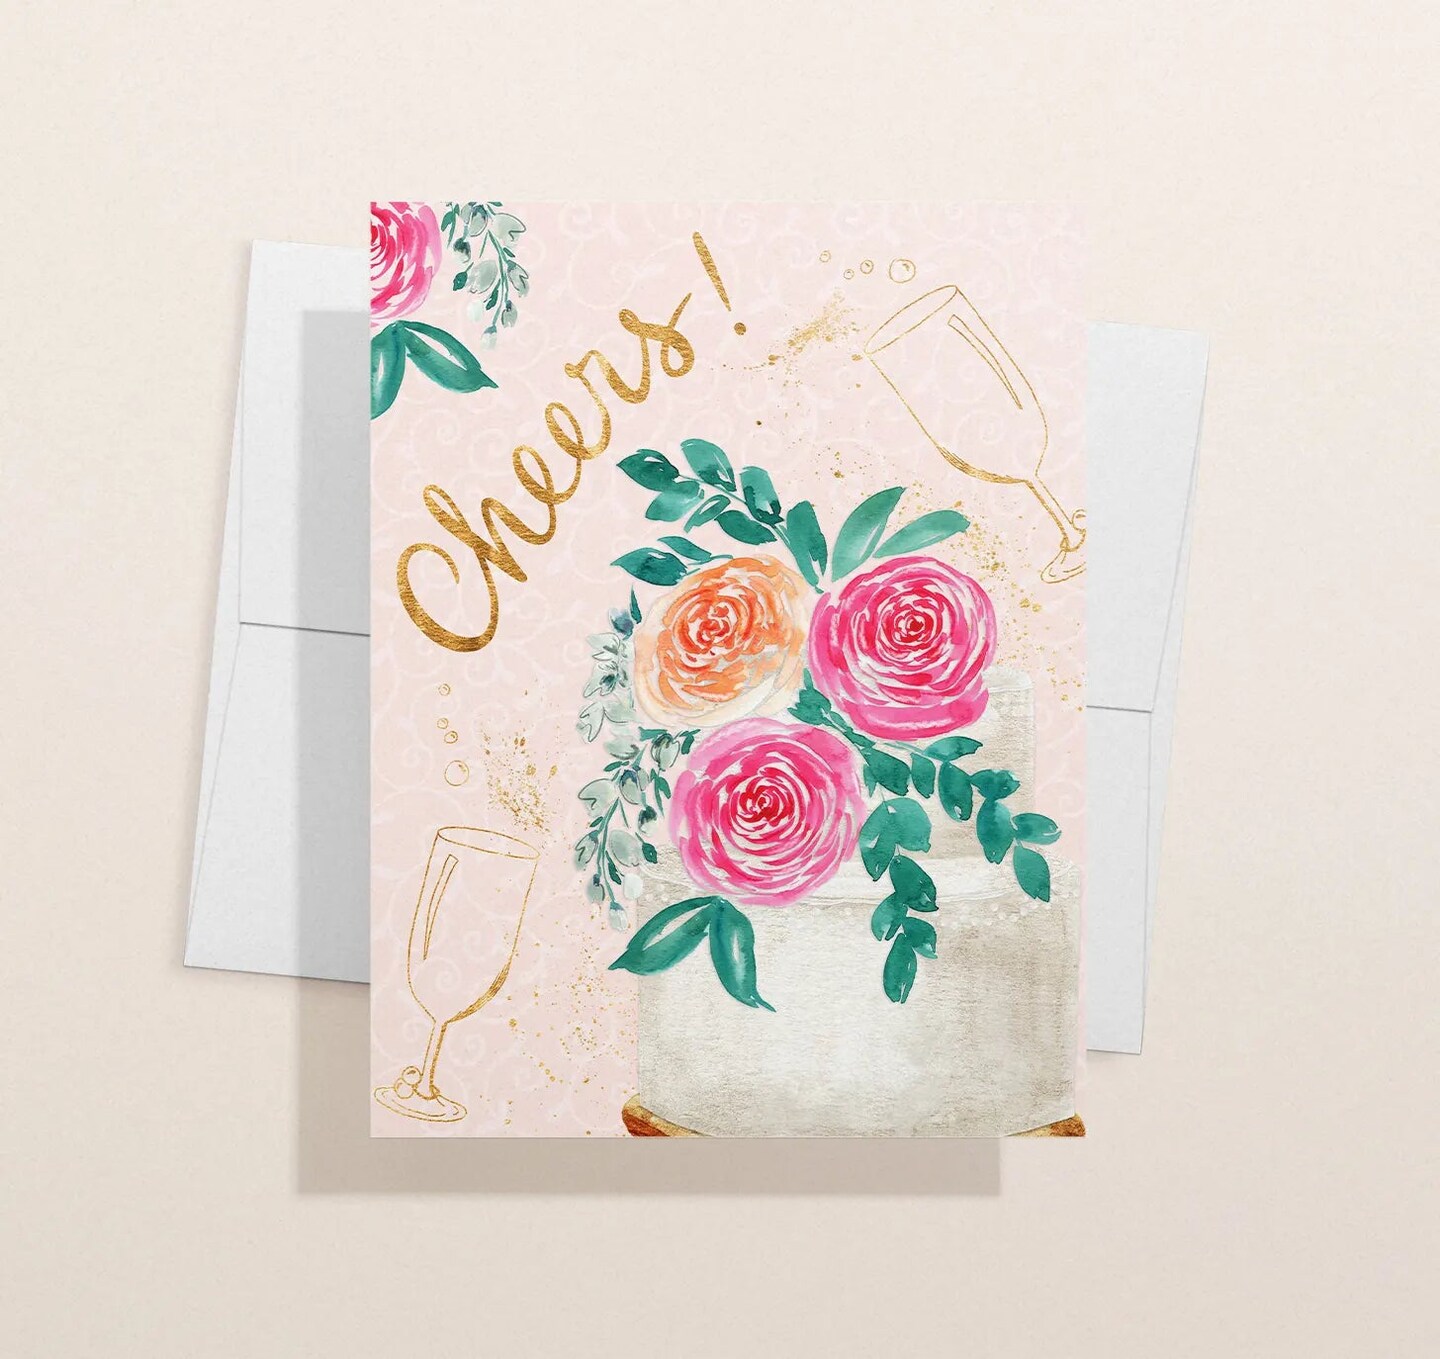 cheers-wedding-congrats-card-congrats-card-available-as-single-greeting-card-or-set-100